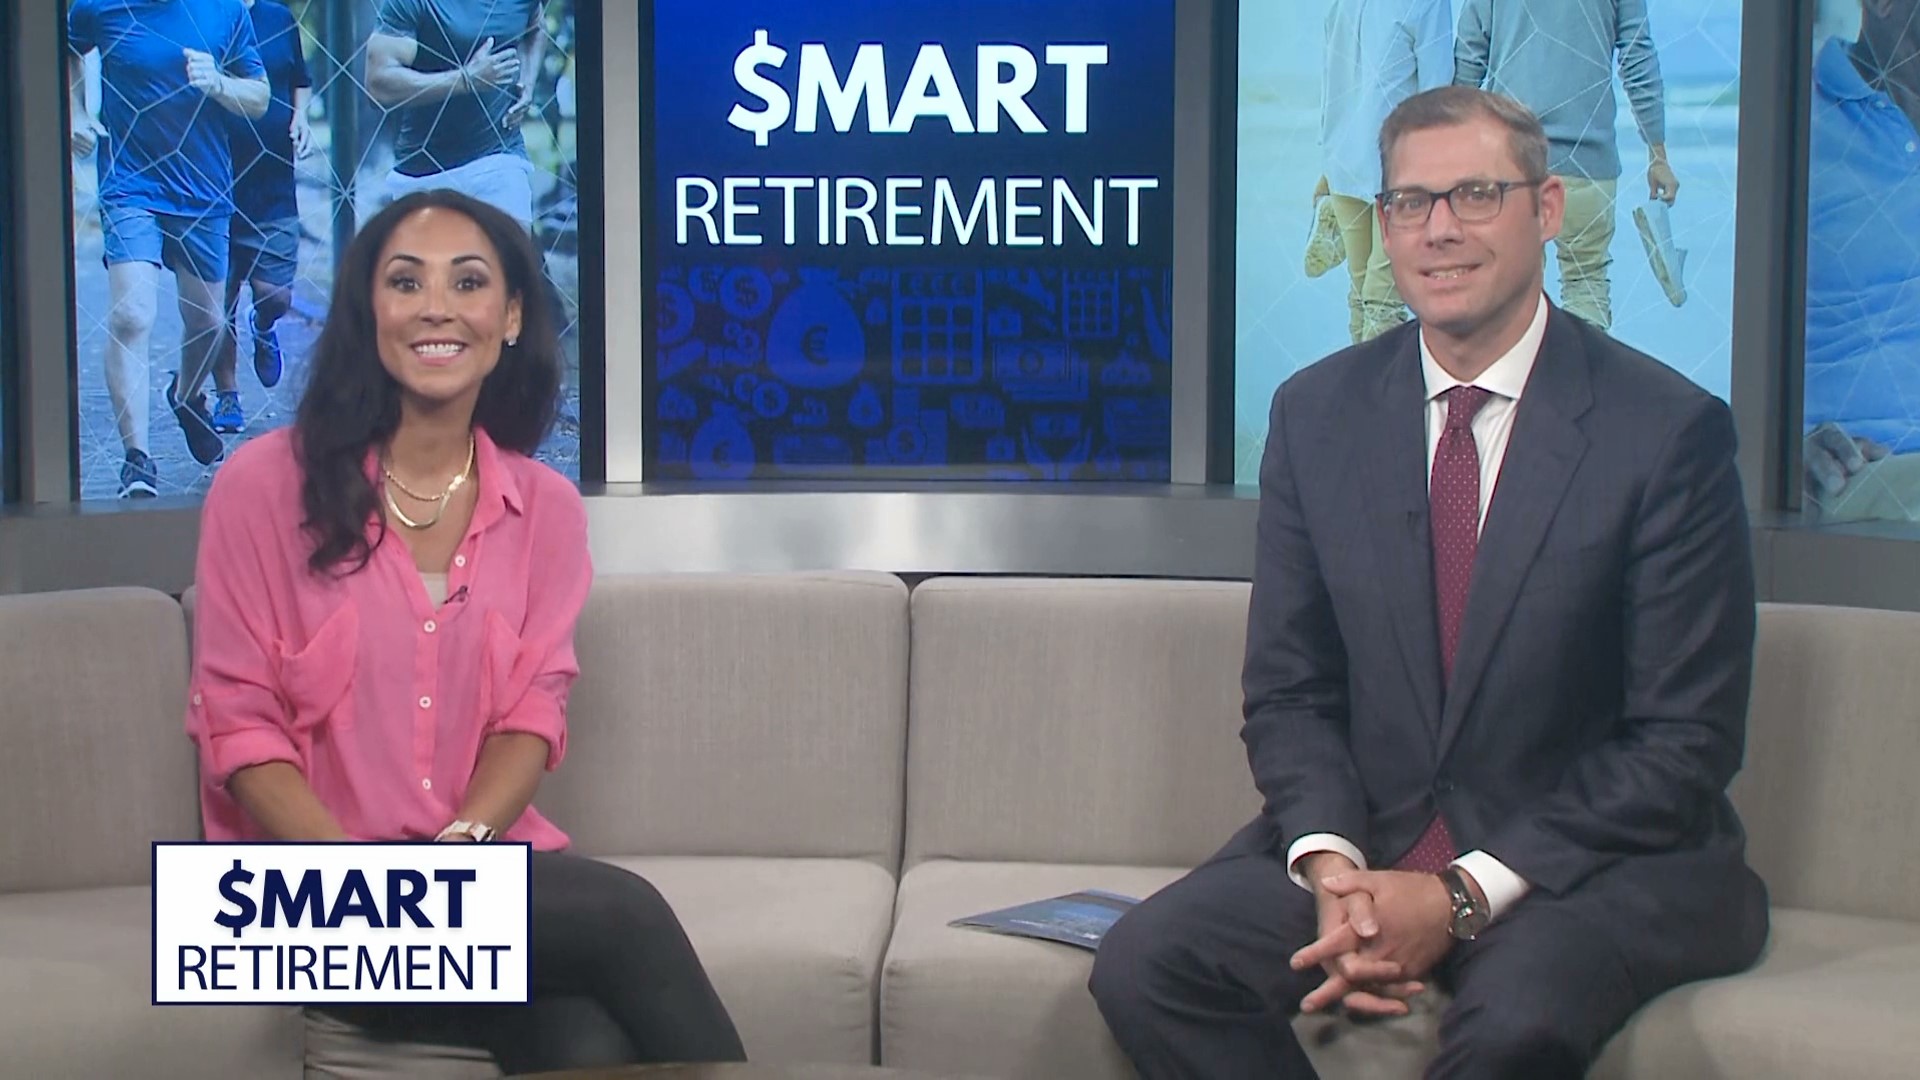 Learn how to reduce your tax burden on Smart Retirement with Johnson Brunetti.